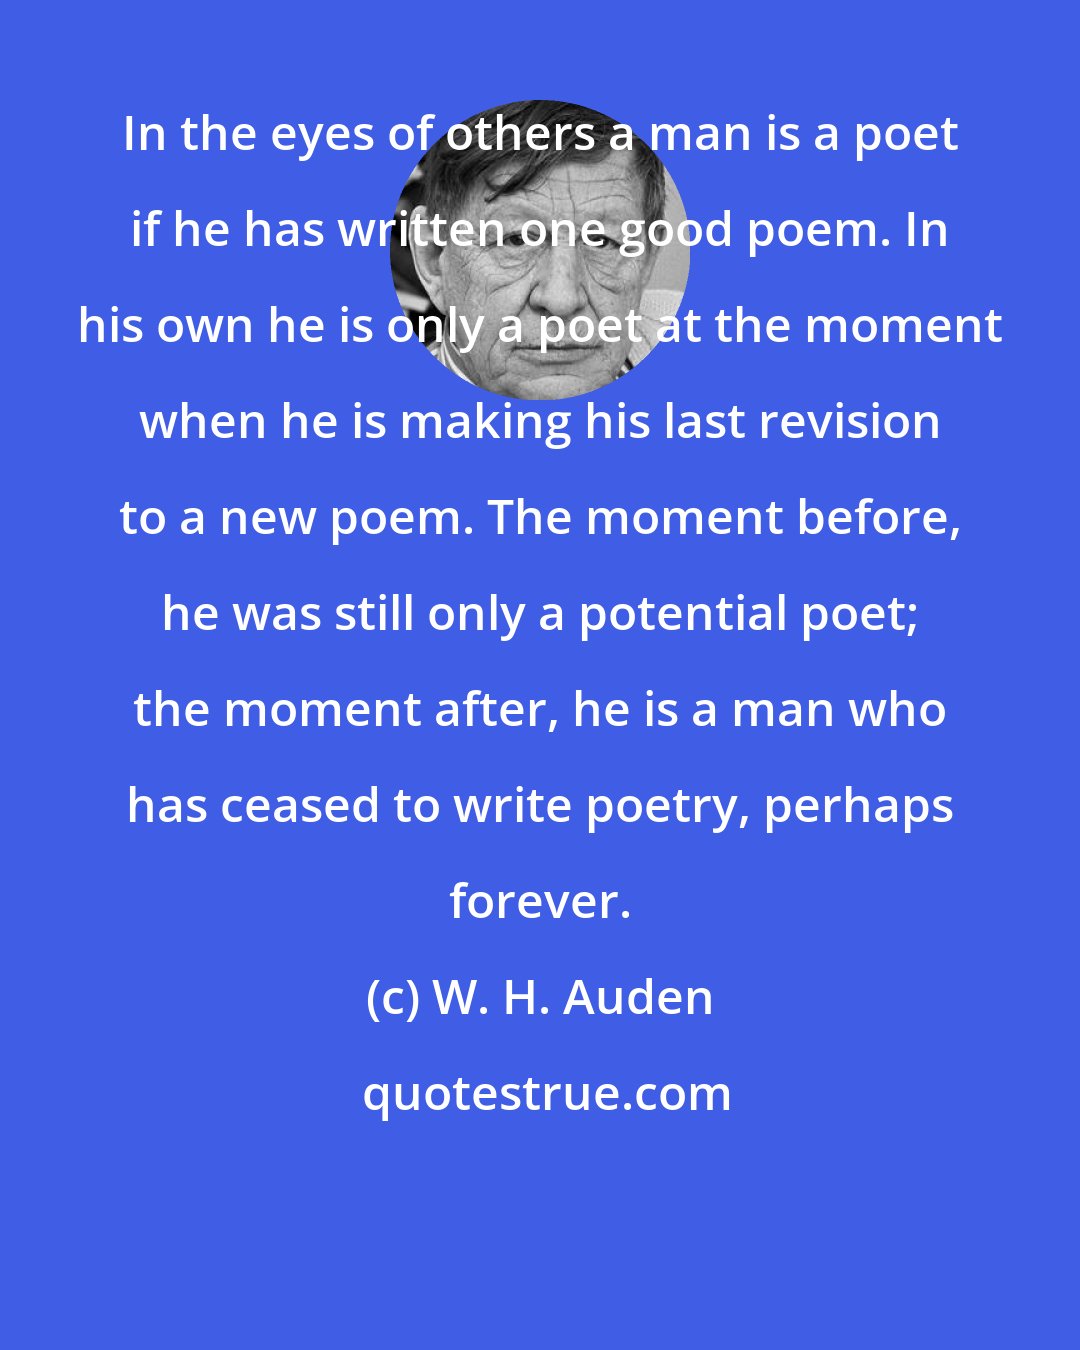 W. H. Auden: In the eyes of others a man is a poet if he has written one good poem. In his own he is only a poet at the moment when he is making his last revision to a new poem. The moment before, he was still only a potential poet; the moment after, he is a man who has ceased to write poetry, perhaps forever.